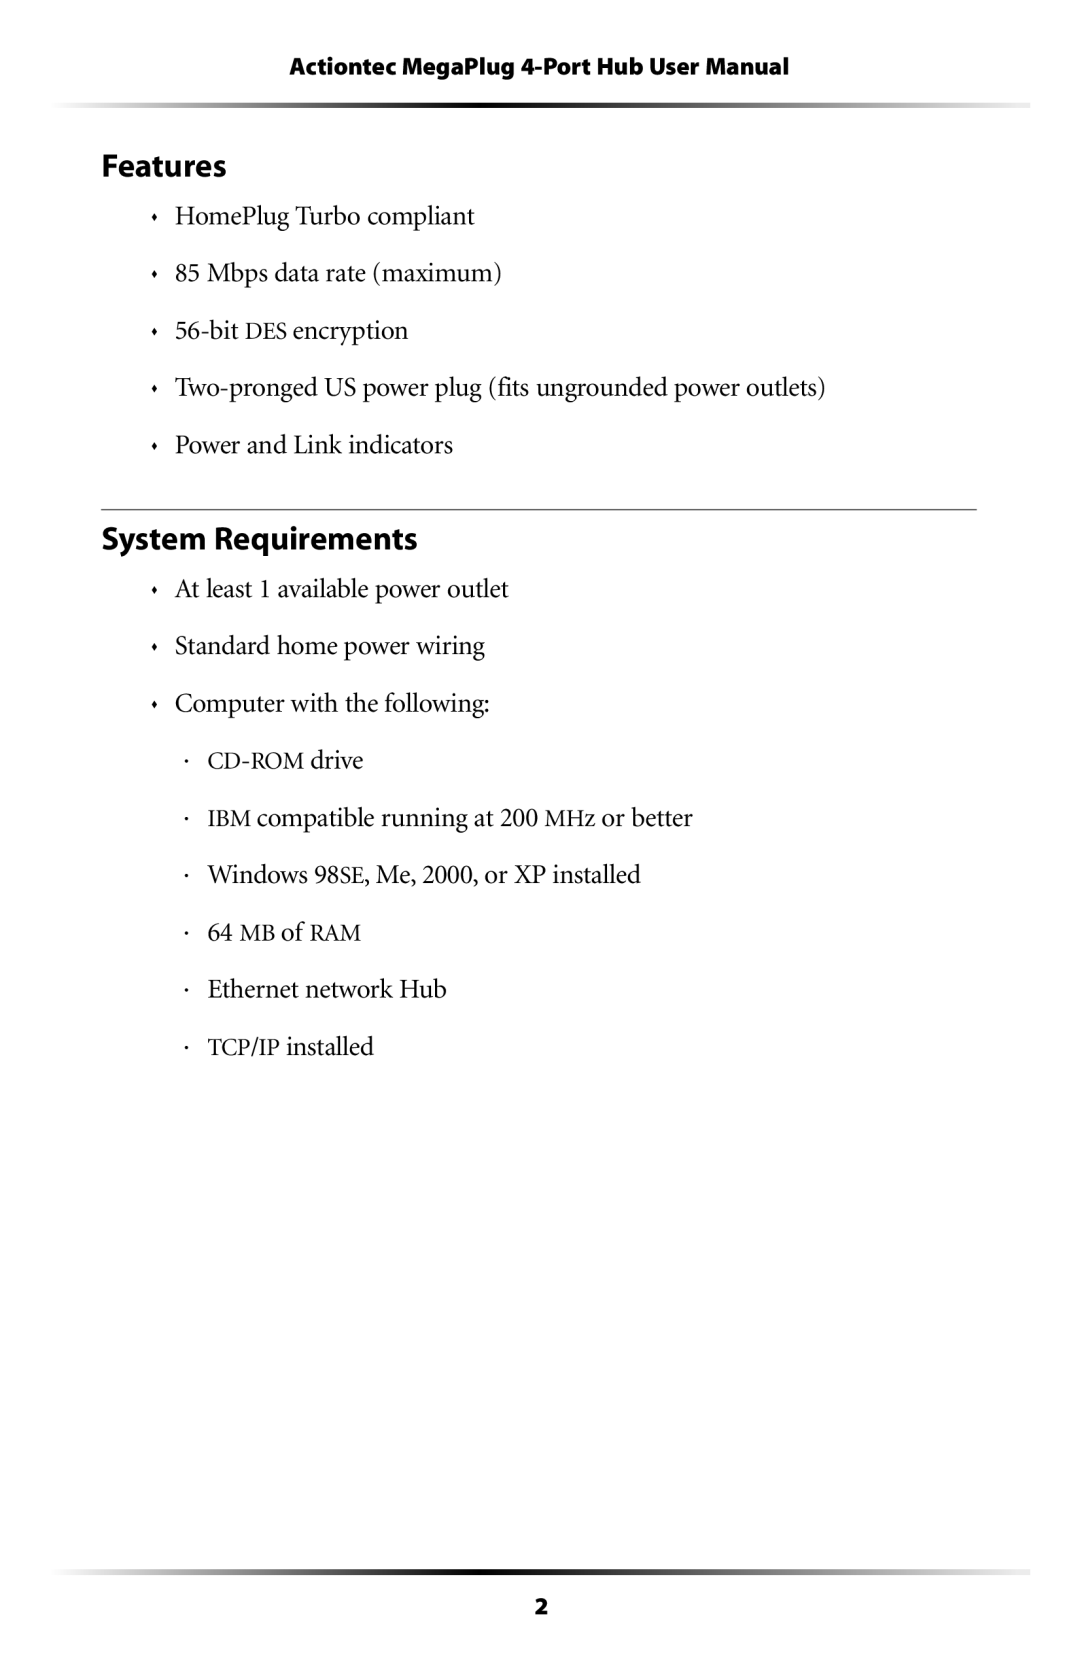 Actiontec electronic HPE400T user manual Features, System Requirements 